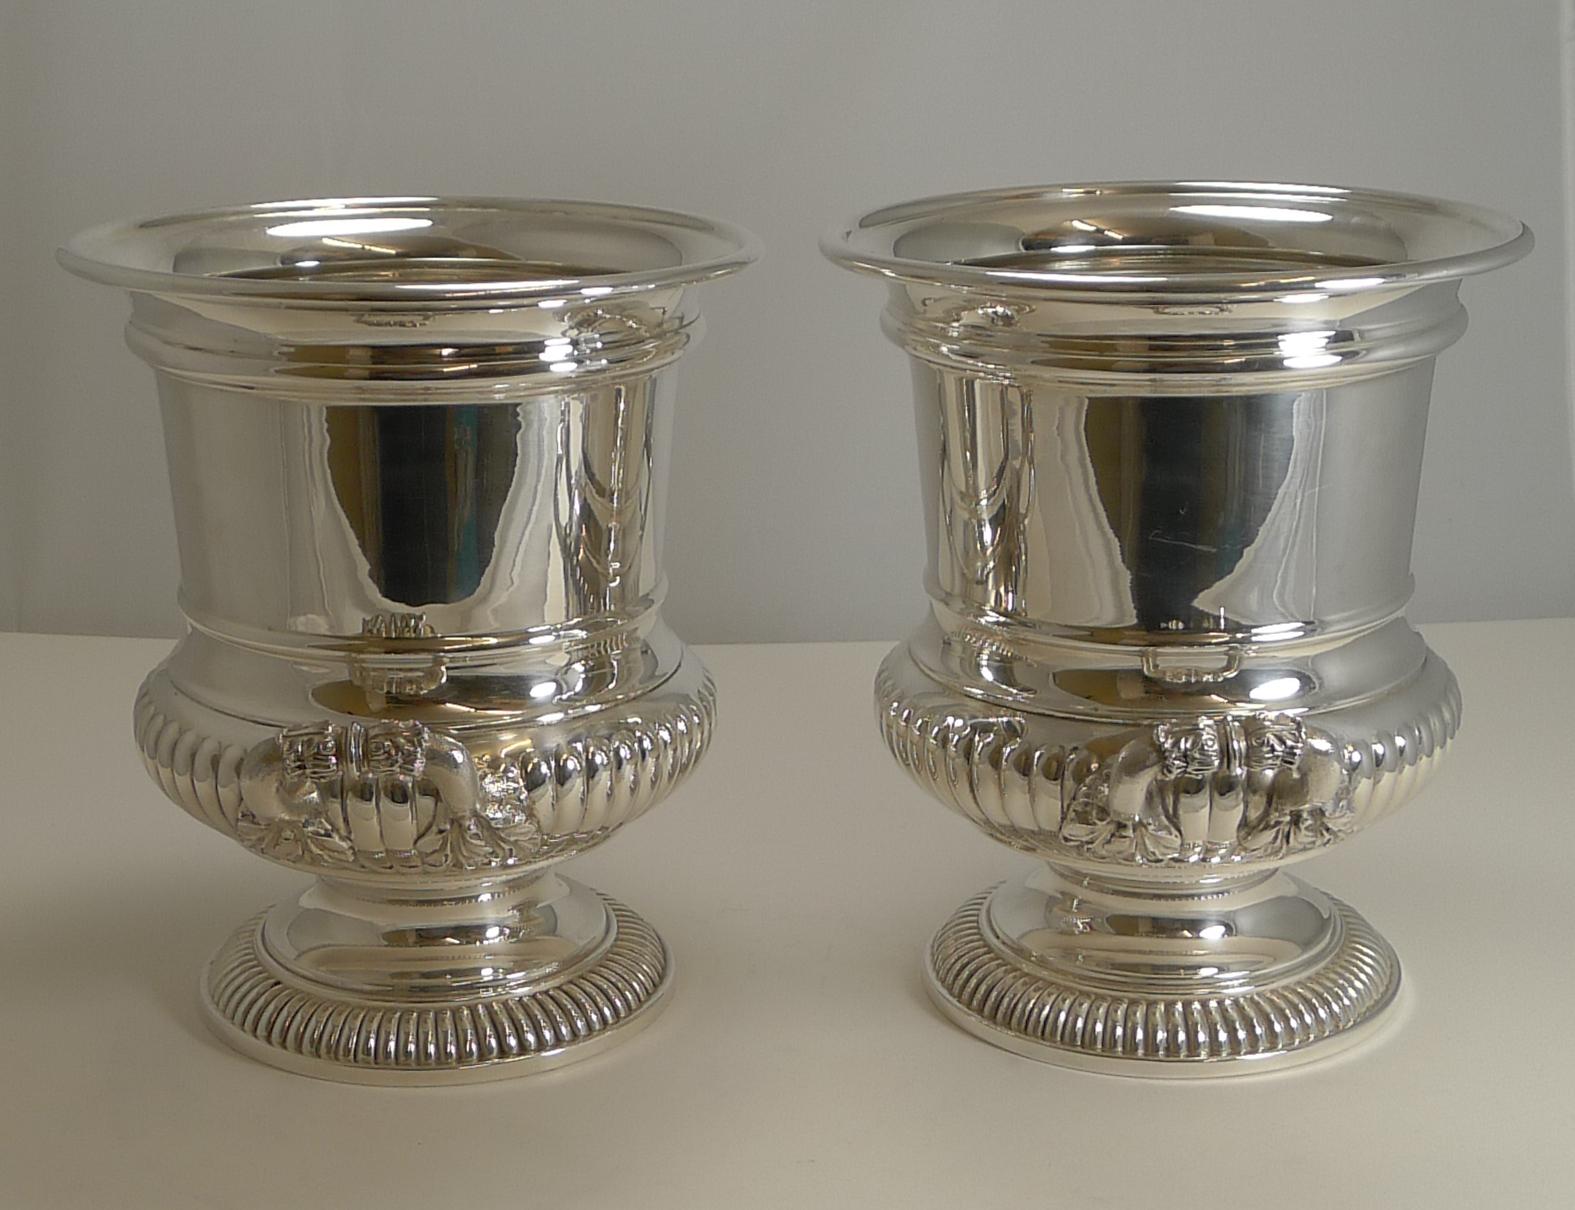 A handsome pair of antique English silver plated wine or Champagne coolers.

This pair is larger than most, and definitely deeper, perfect for lots of ice.

Dating to circa 1910, they remain in excellent condition and ready to serve. The top rim